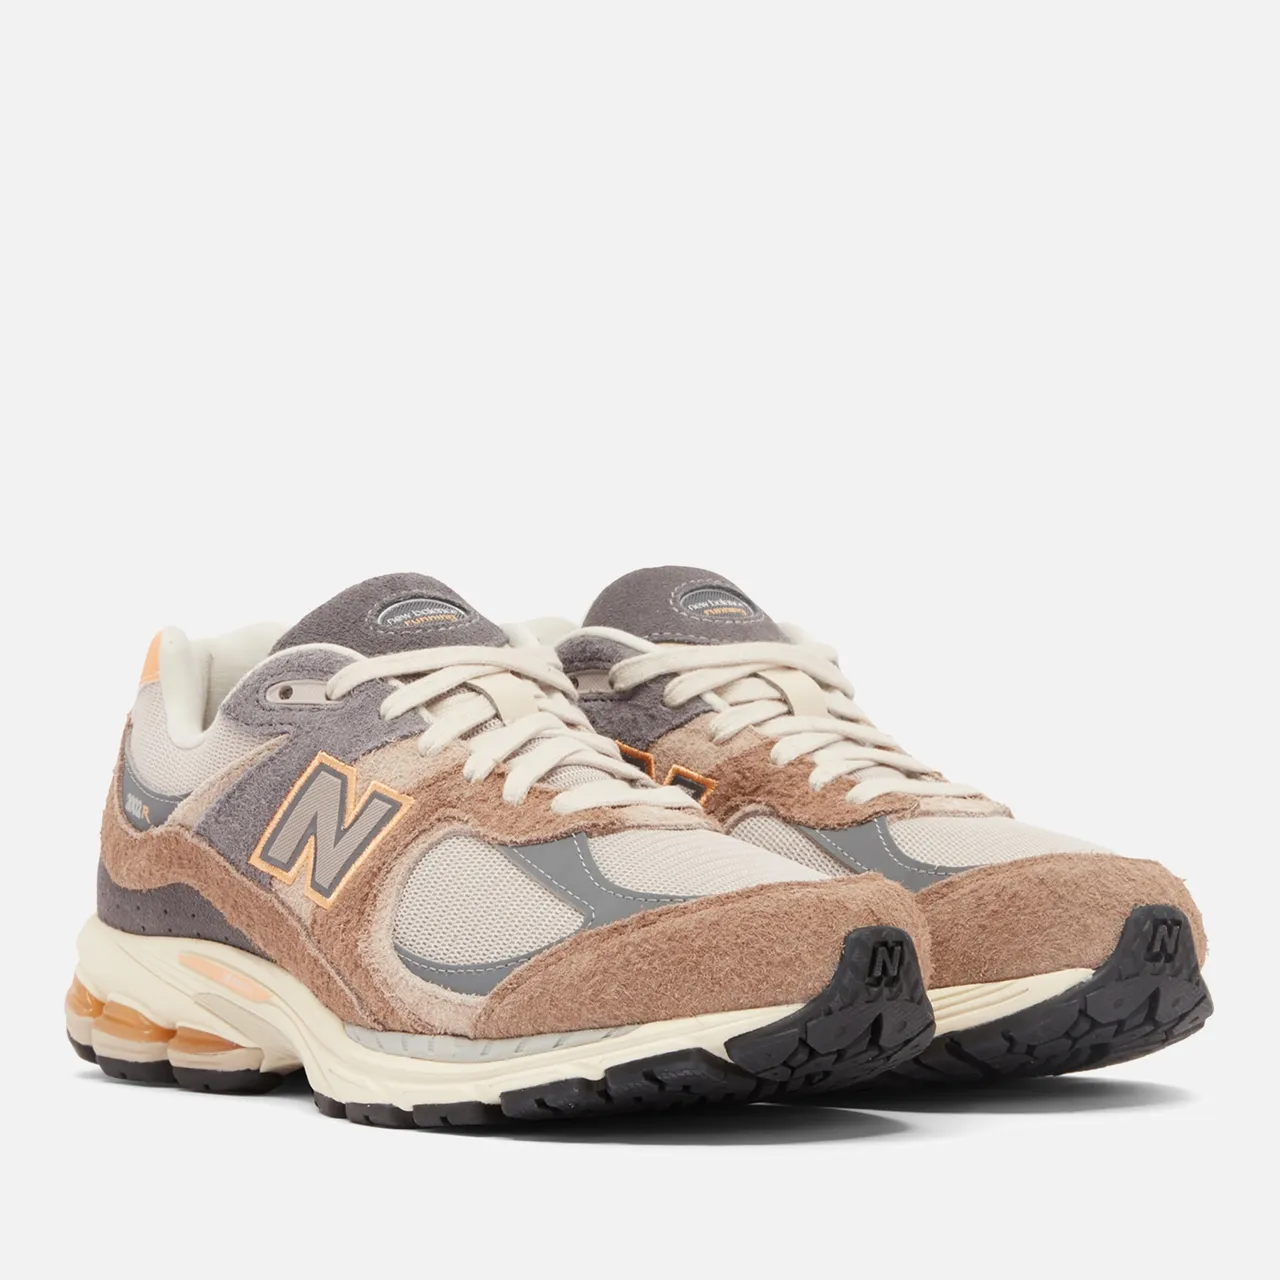 New Balance Men's 2002r Suede and Mesh Trainers